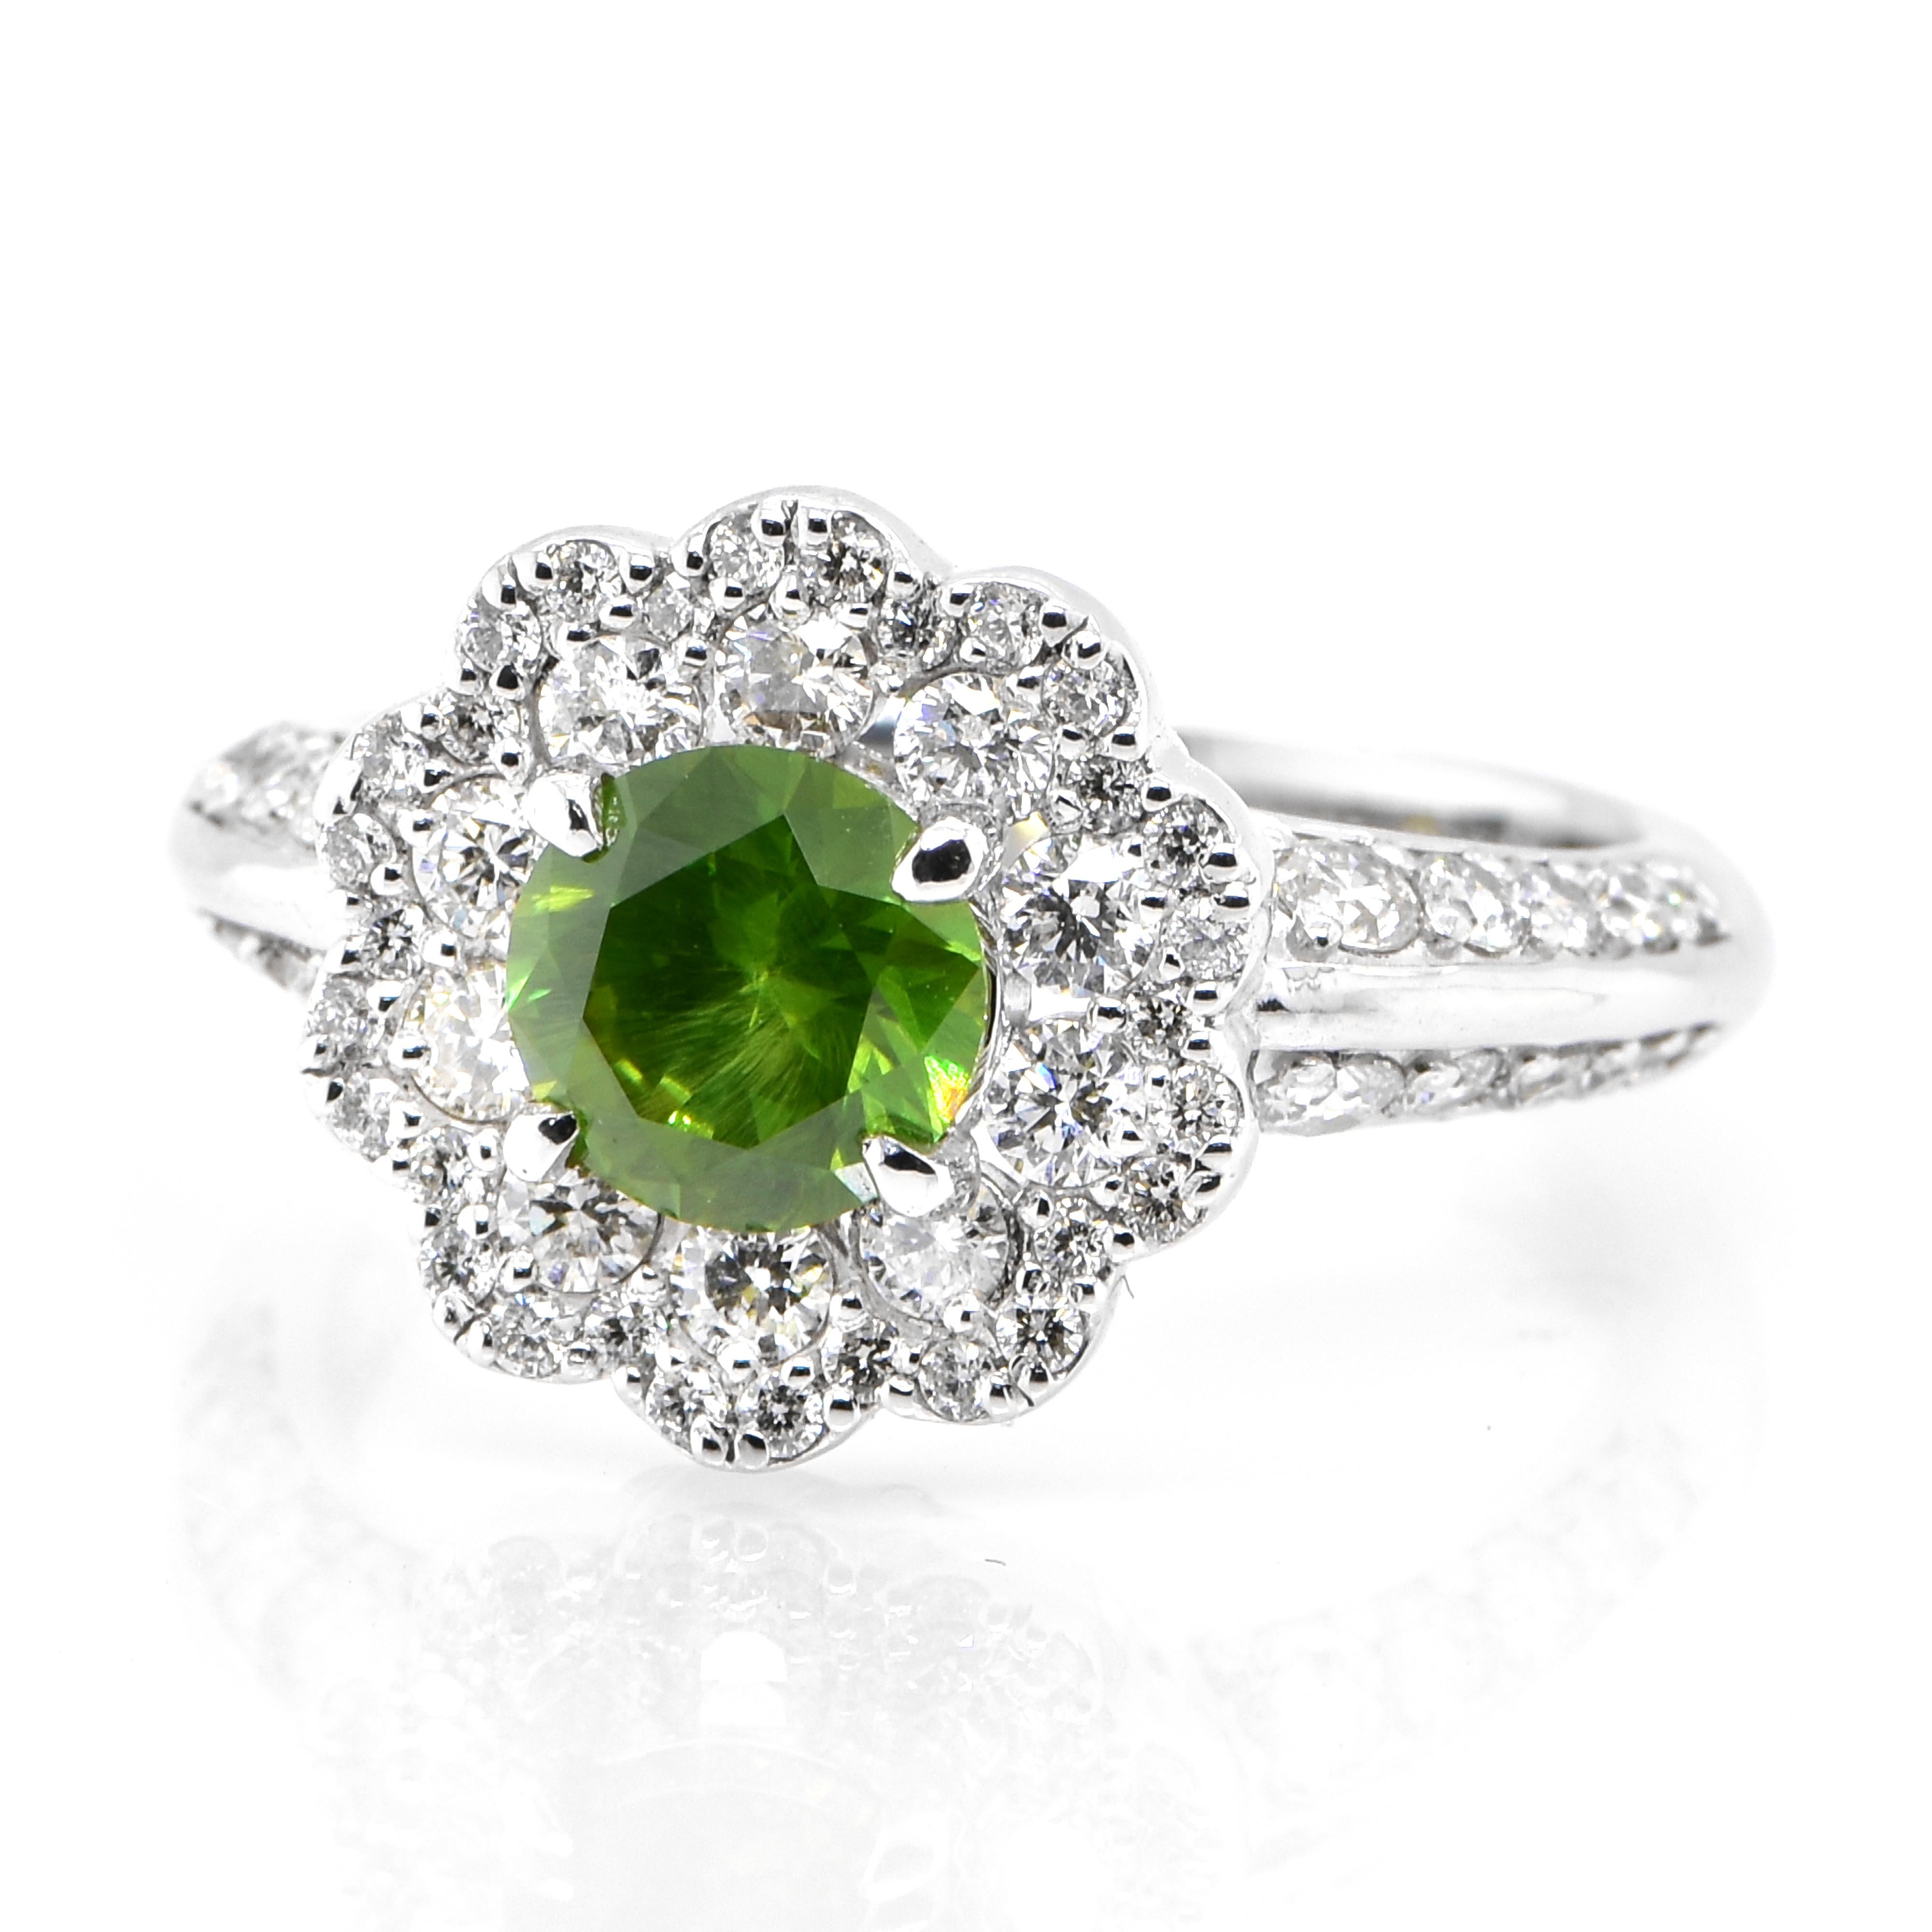 A beautiful cluster ring featuring a 1.05 Carat, Natural Demantoid Garnet and 0.84 Carats of Diamond Accents set in Platinum. Demantoid Garnet's only known source used to be the Ural Mountains in Russia however recent discoveries in Africa have